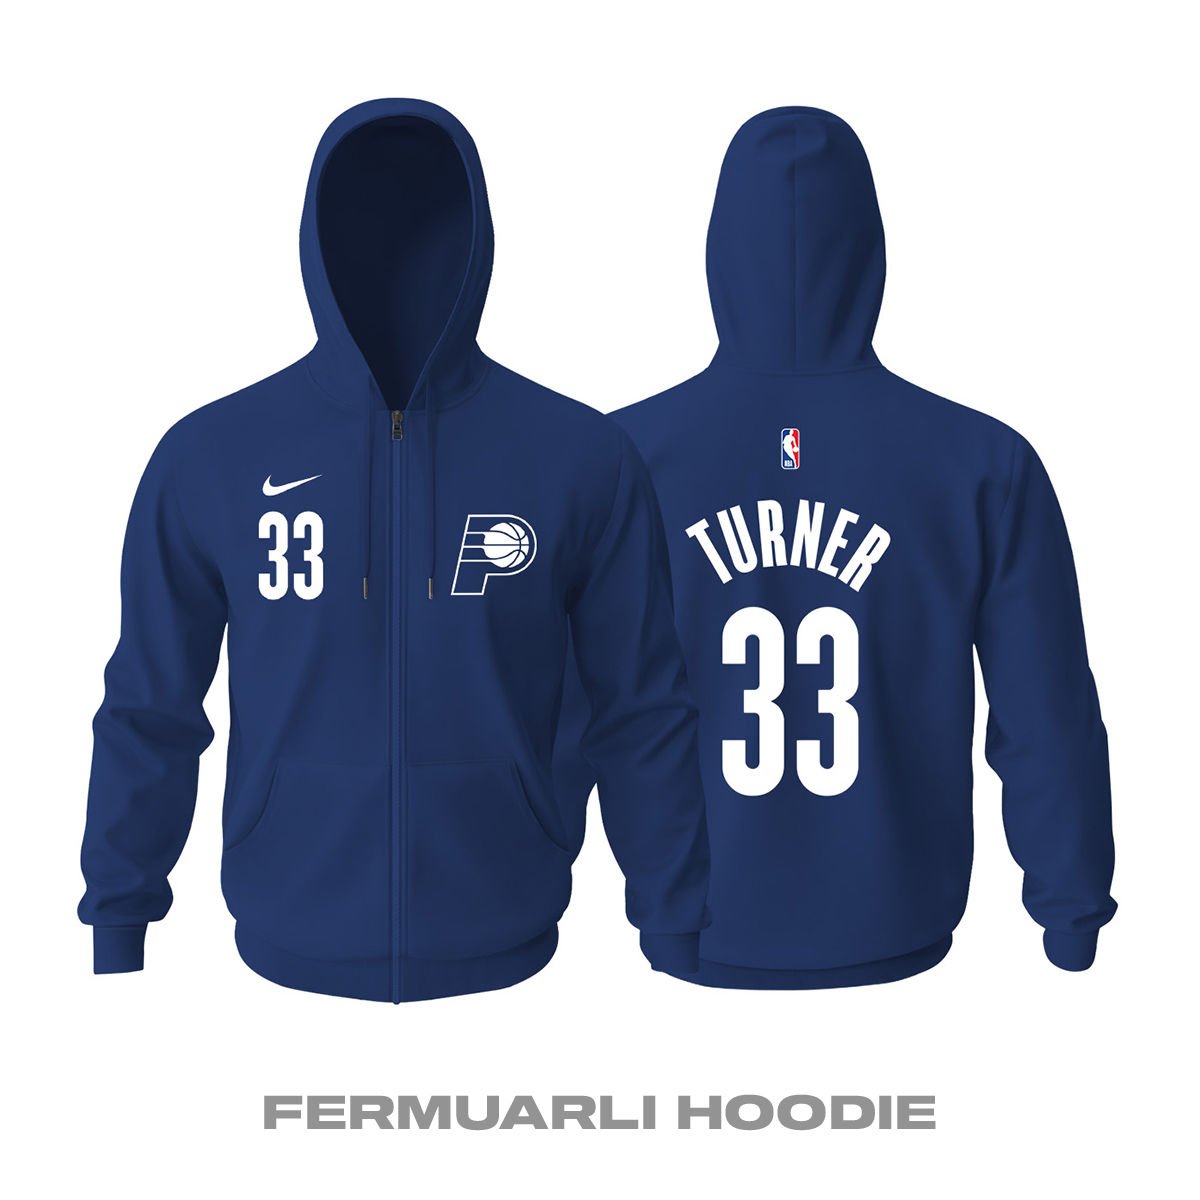 Indiana Pacers: City Edition 2022/2023 Fermuarlı Hoodie